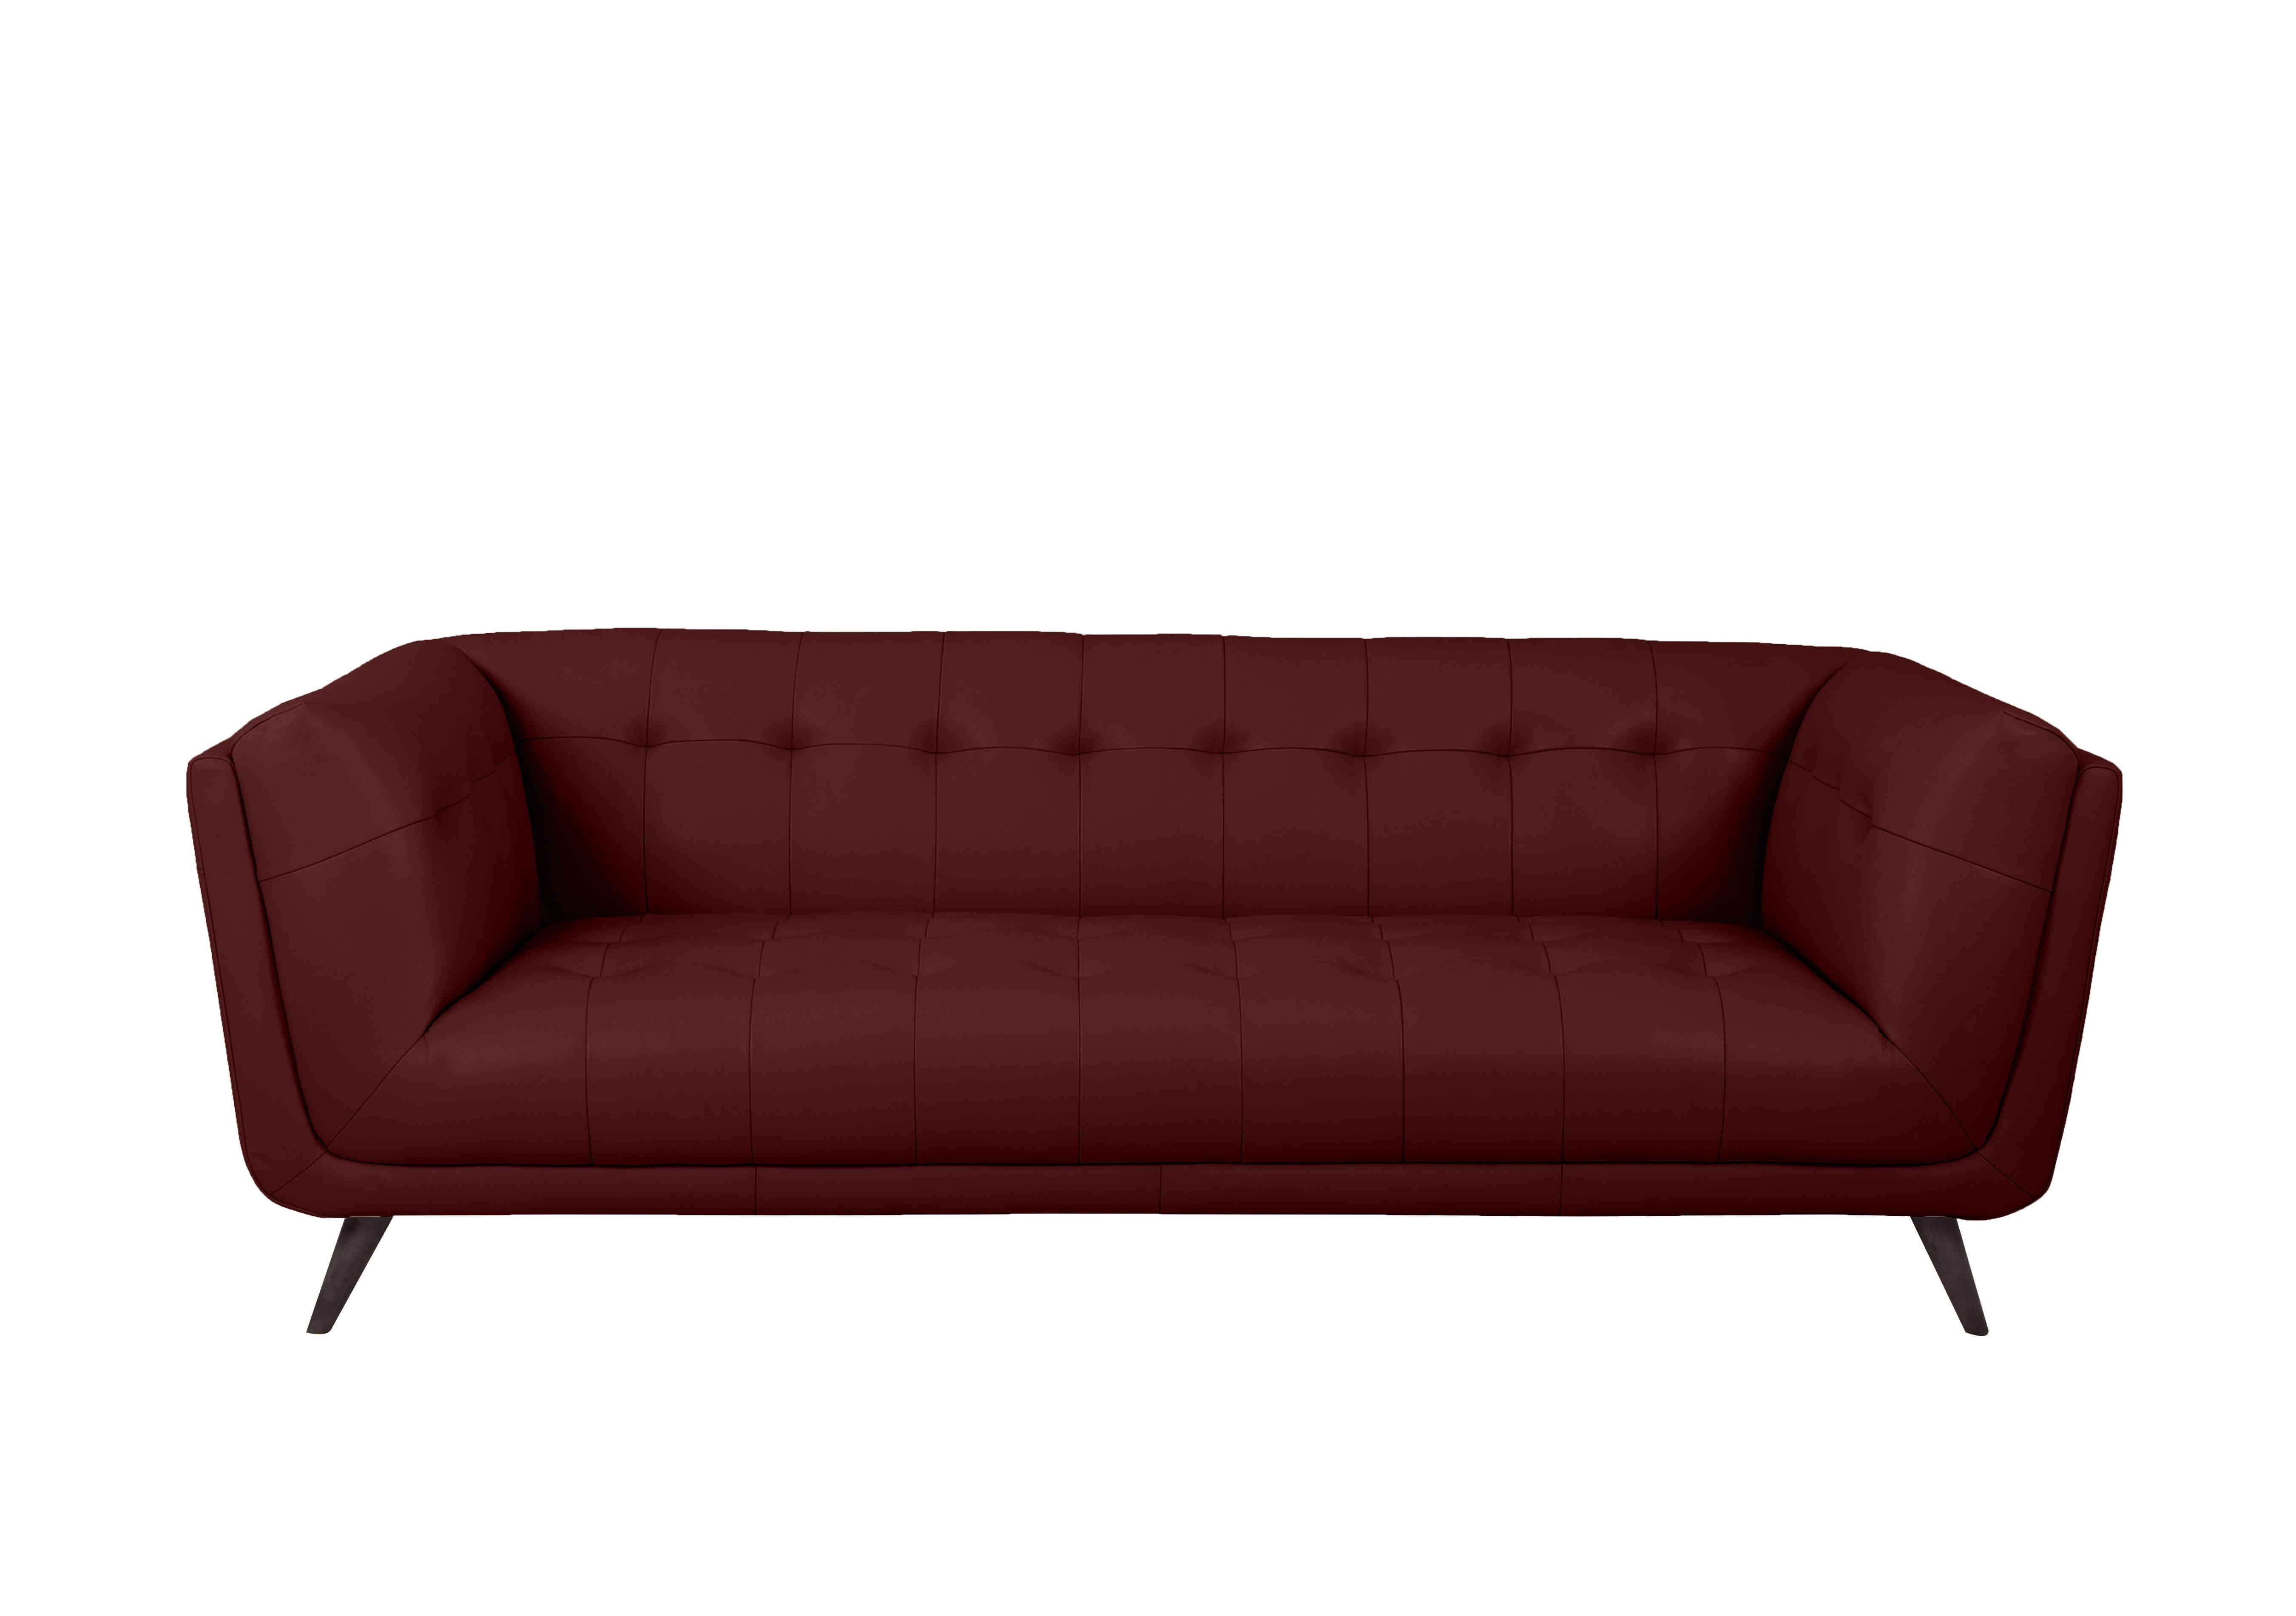 Rene 3 Seater Leather Sofa in Montana Ruby on Furniture Village